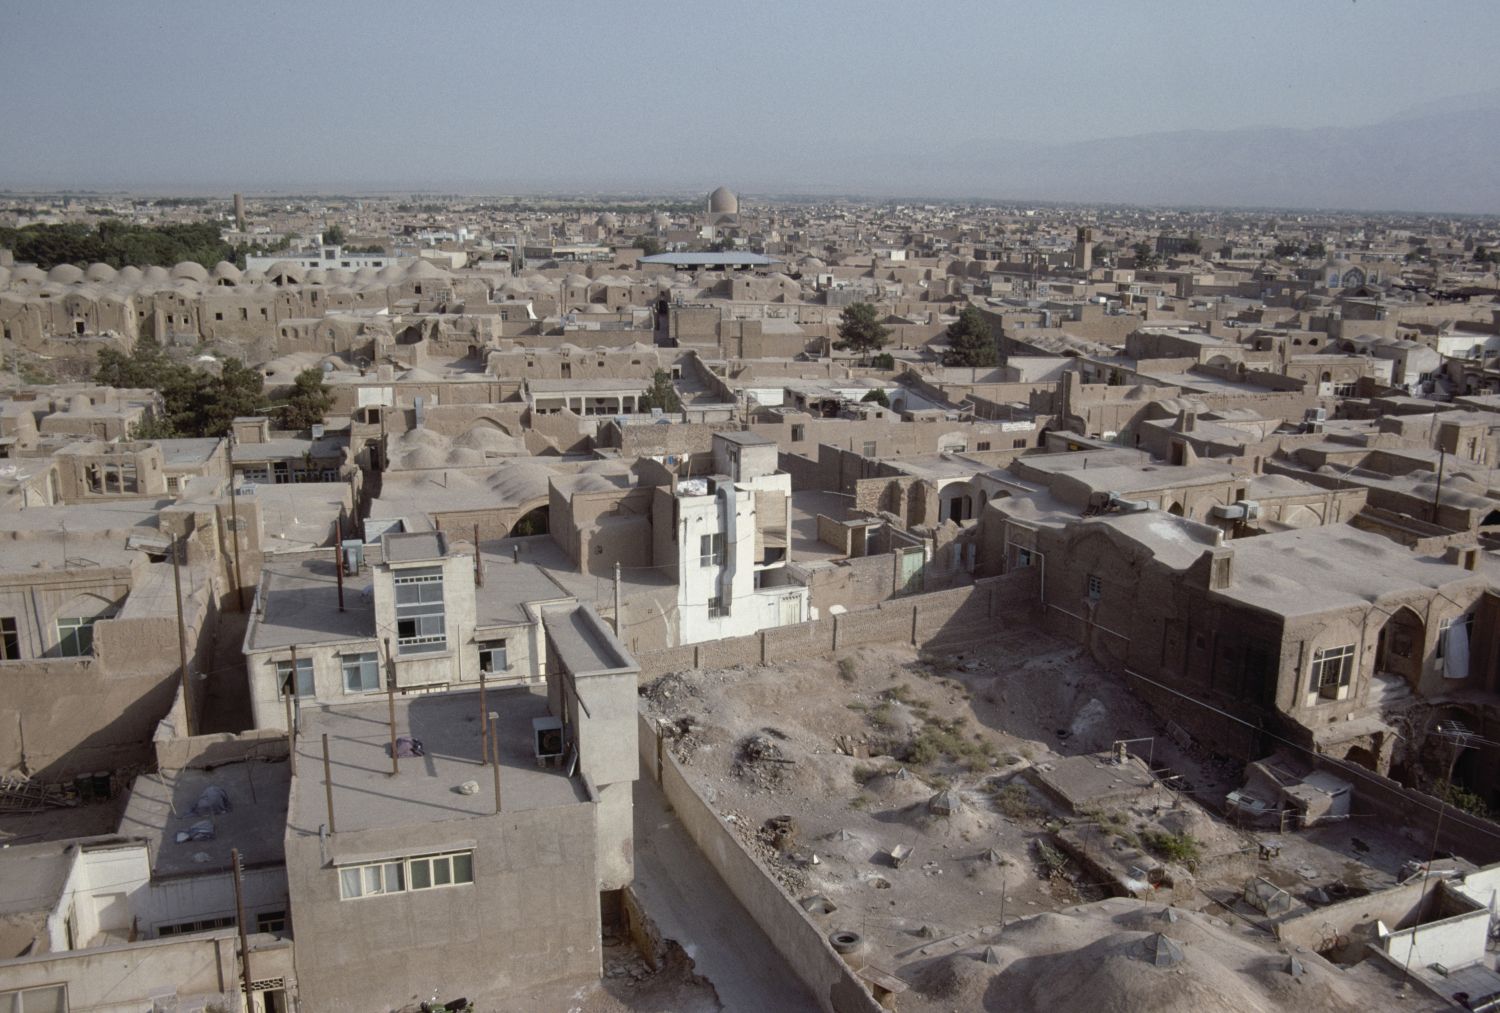 View over city facing east, taken from the minaret of the&nbsp;<a href="https://archnet.org/sites/1628" target="_blank" data-bypass="true">Great Mosque</a>.